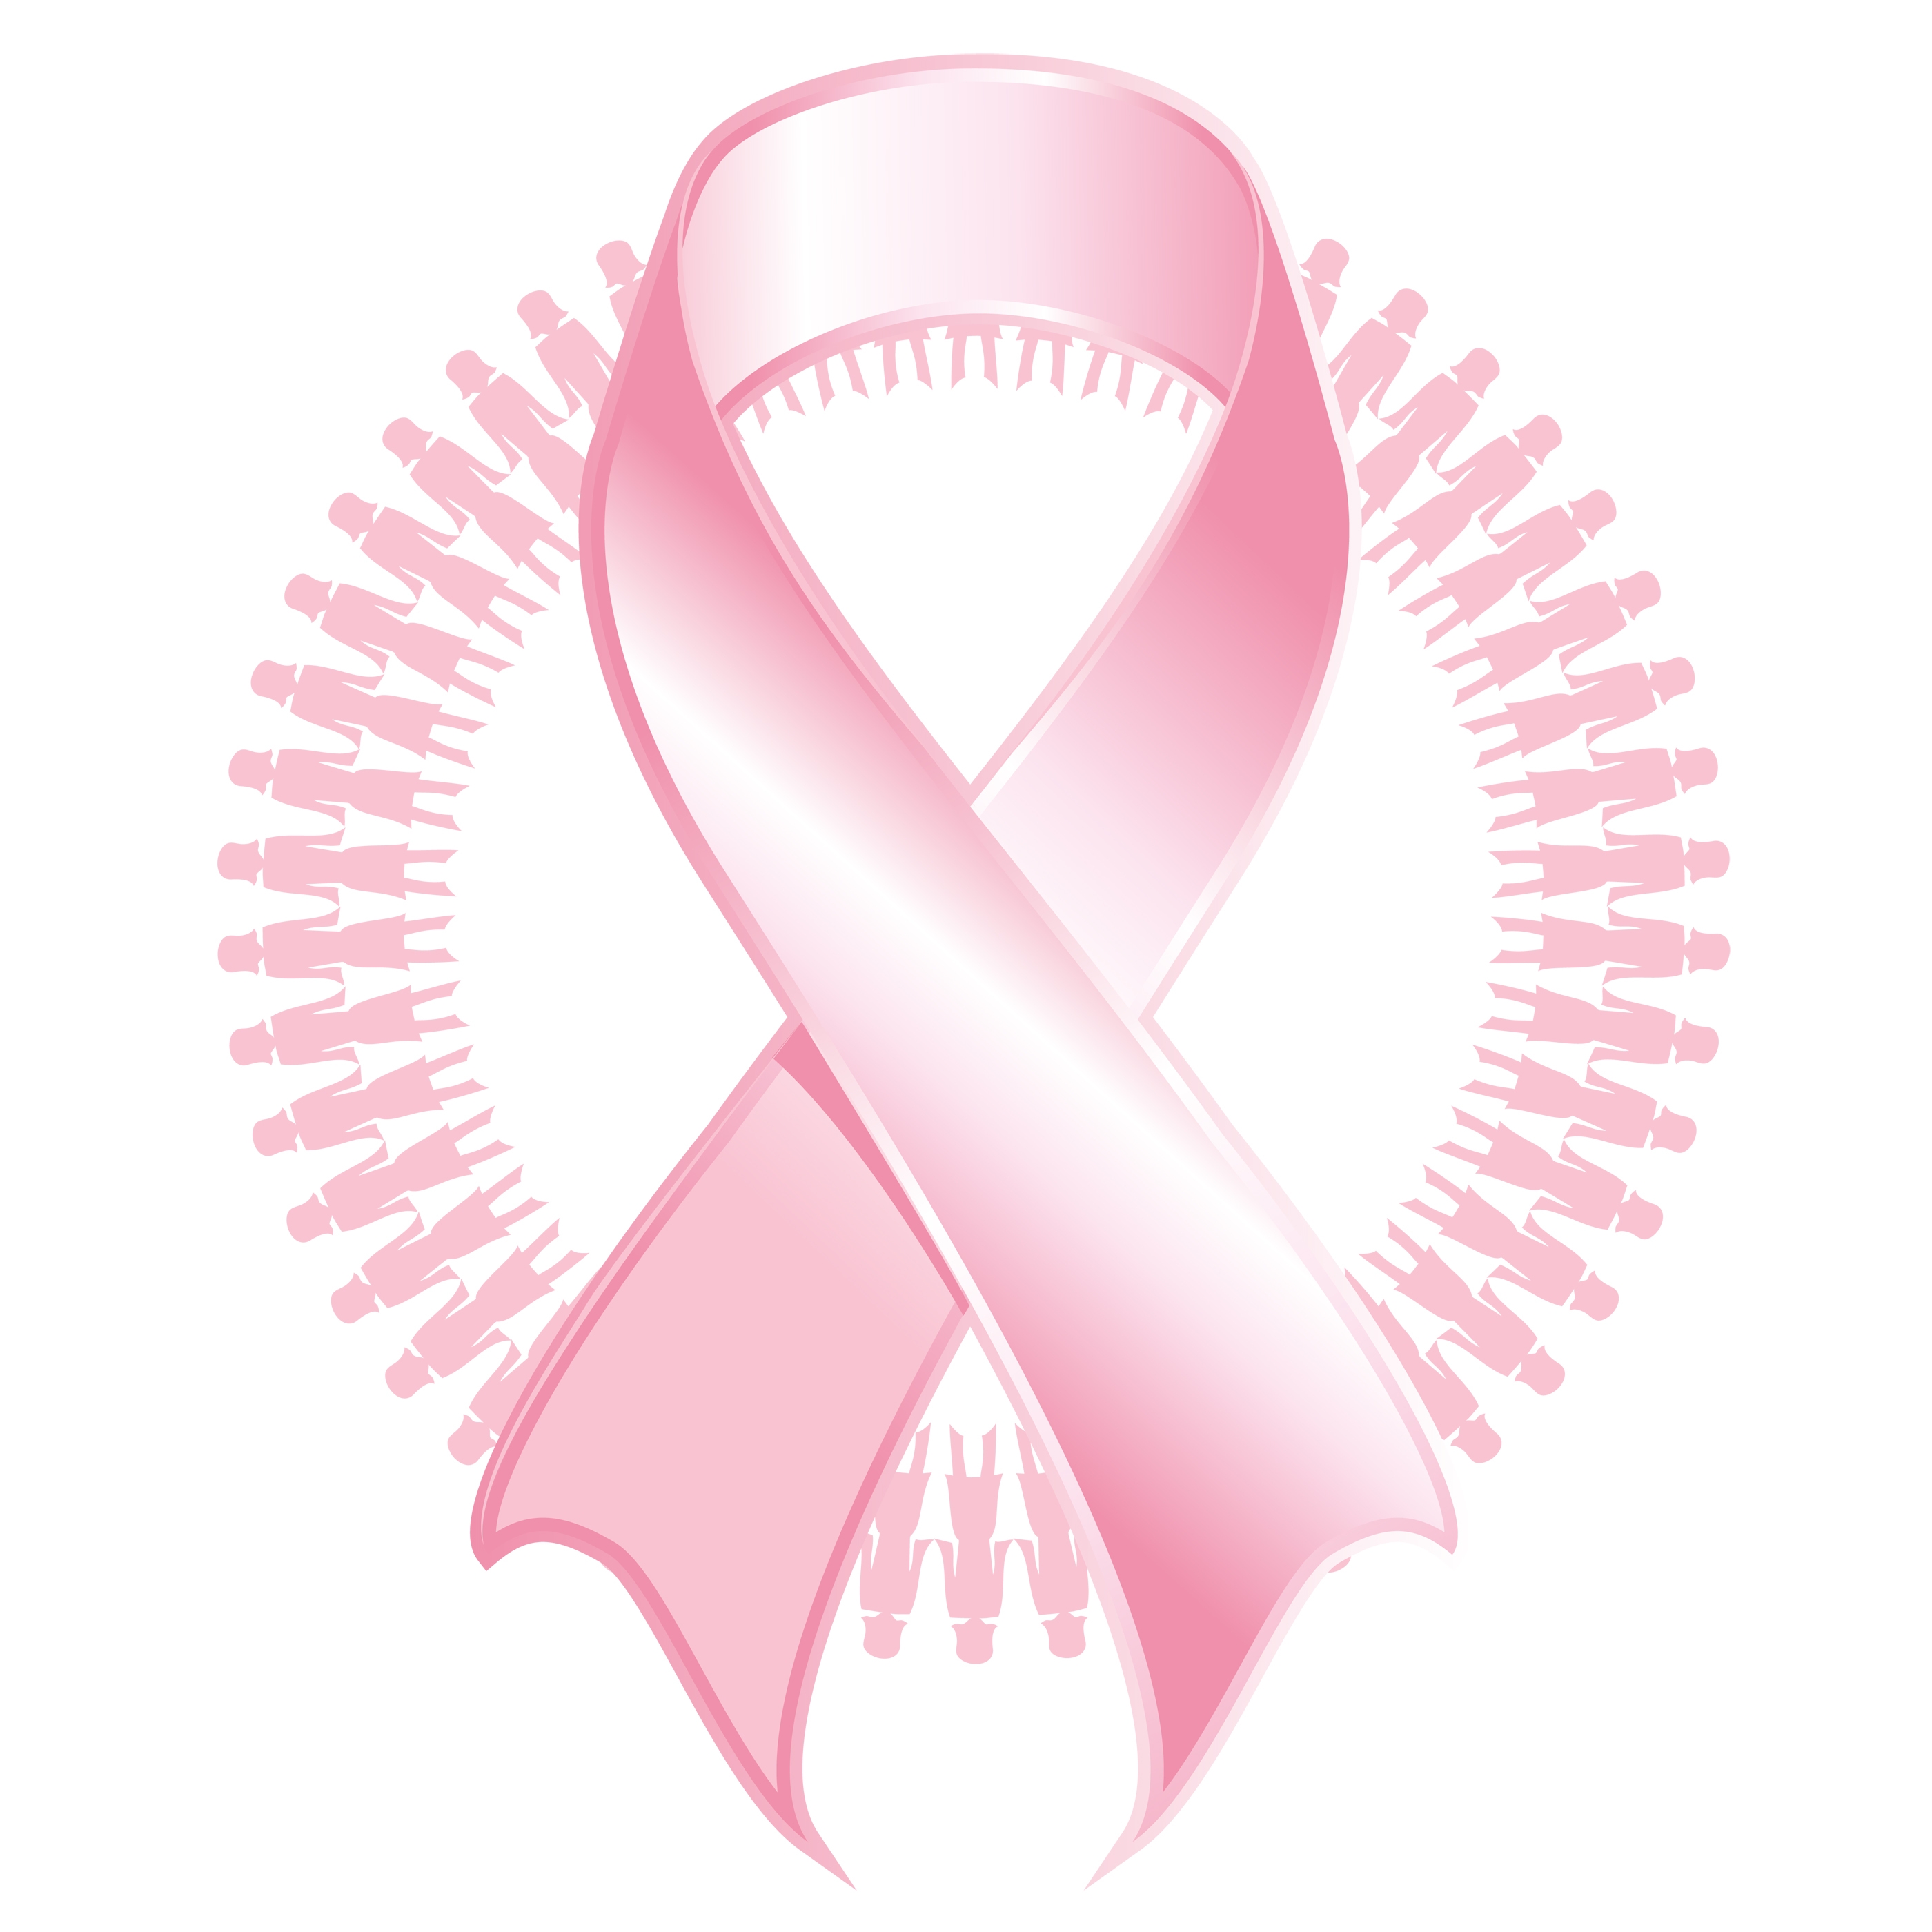 october-is-national-breast-cancer-awareness-month